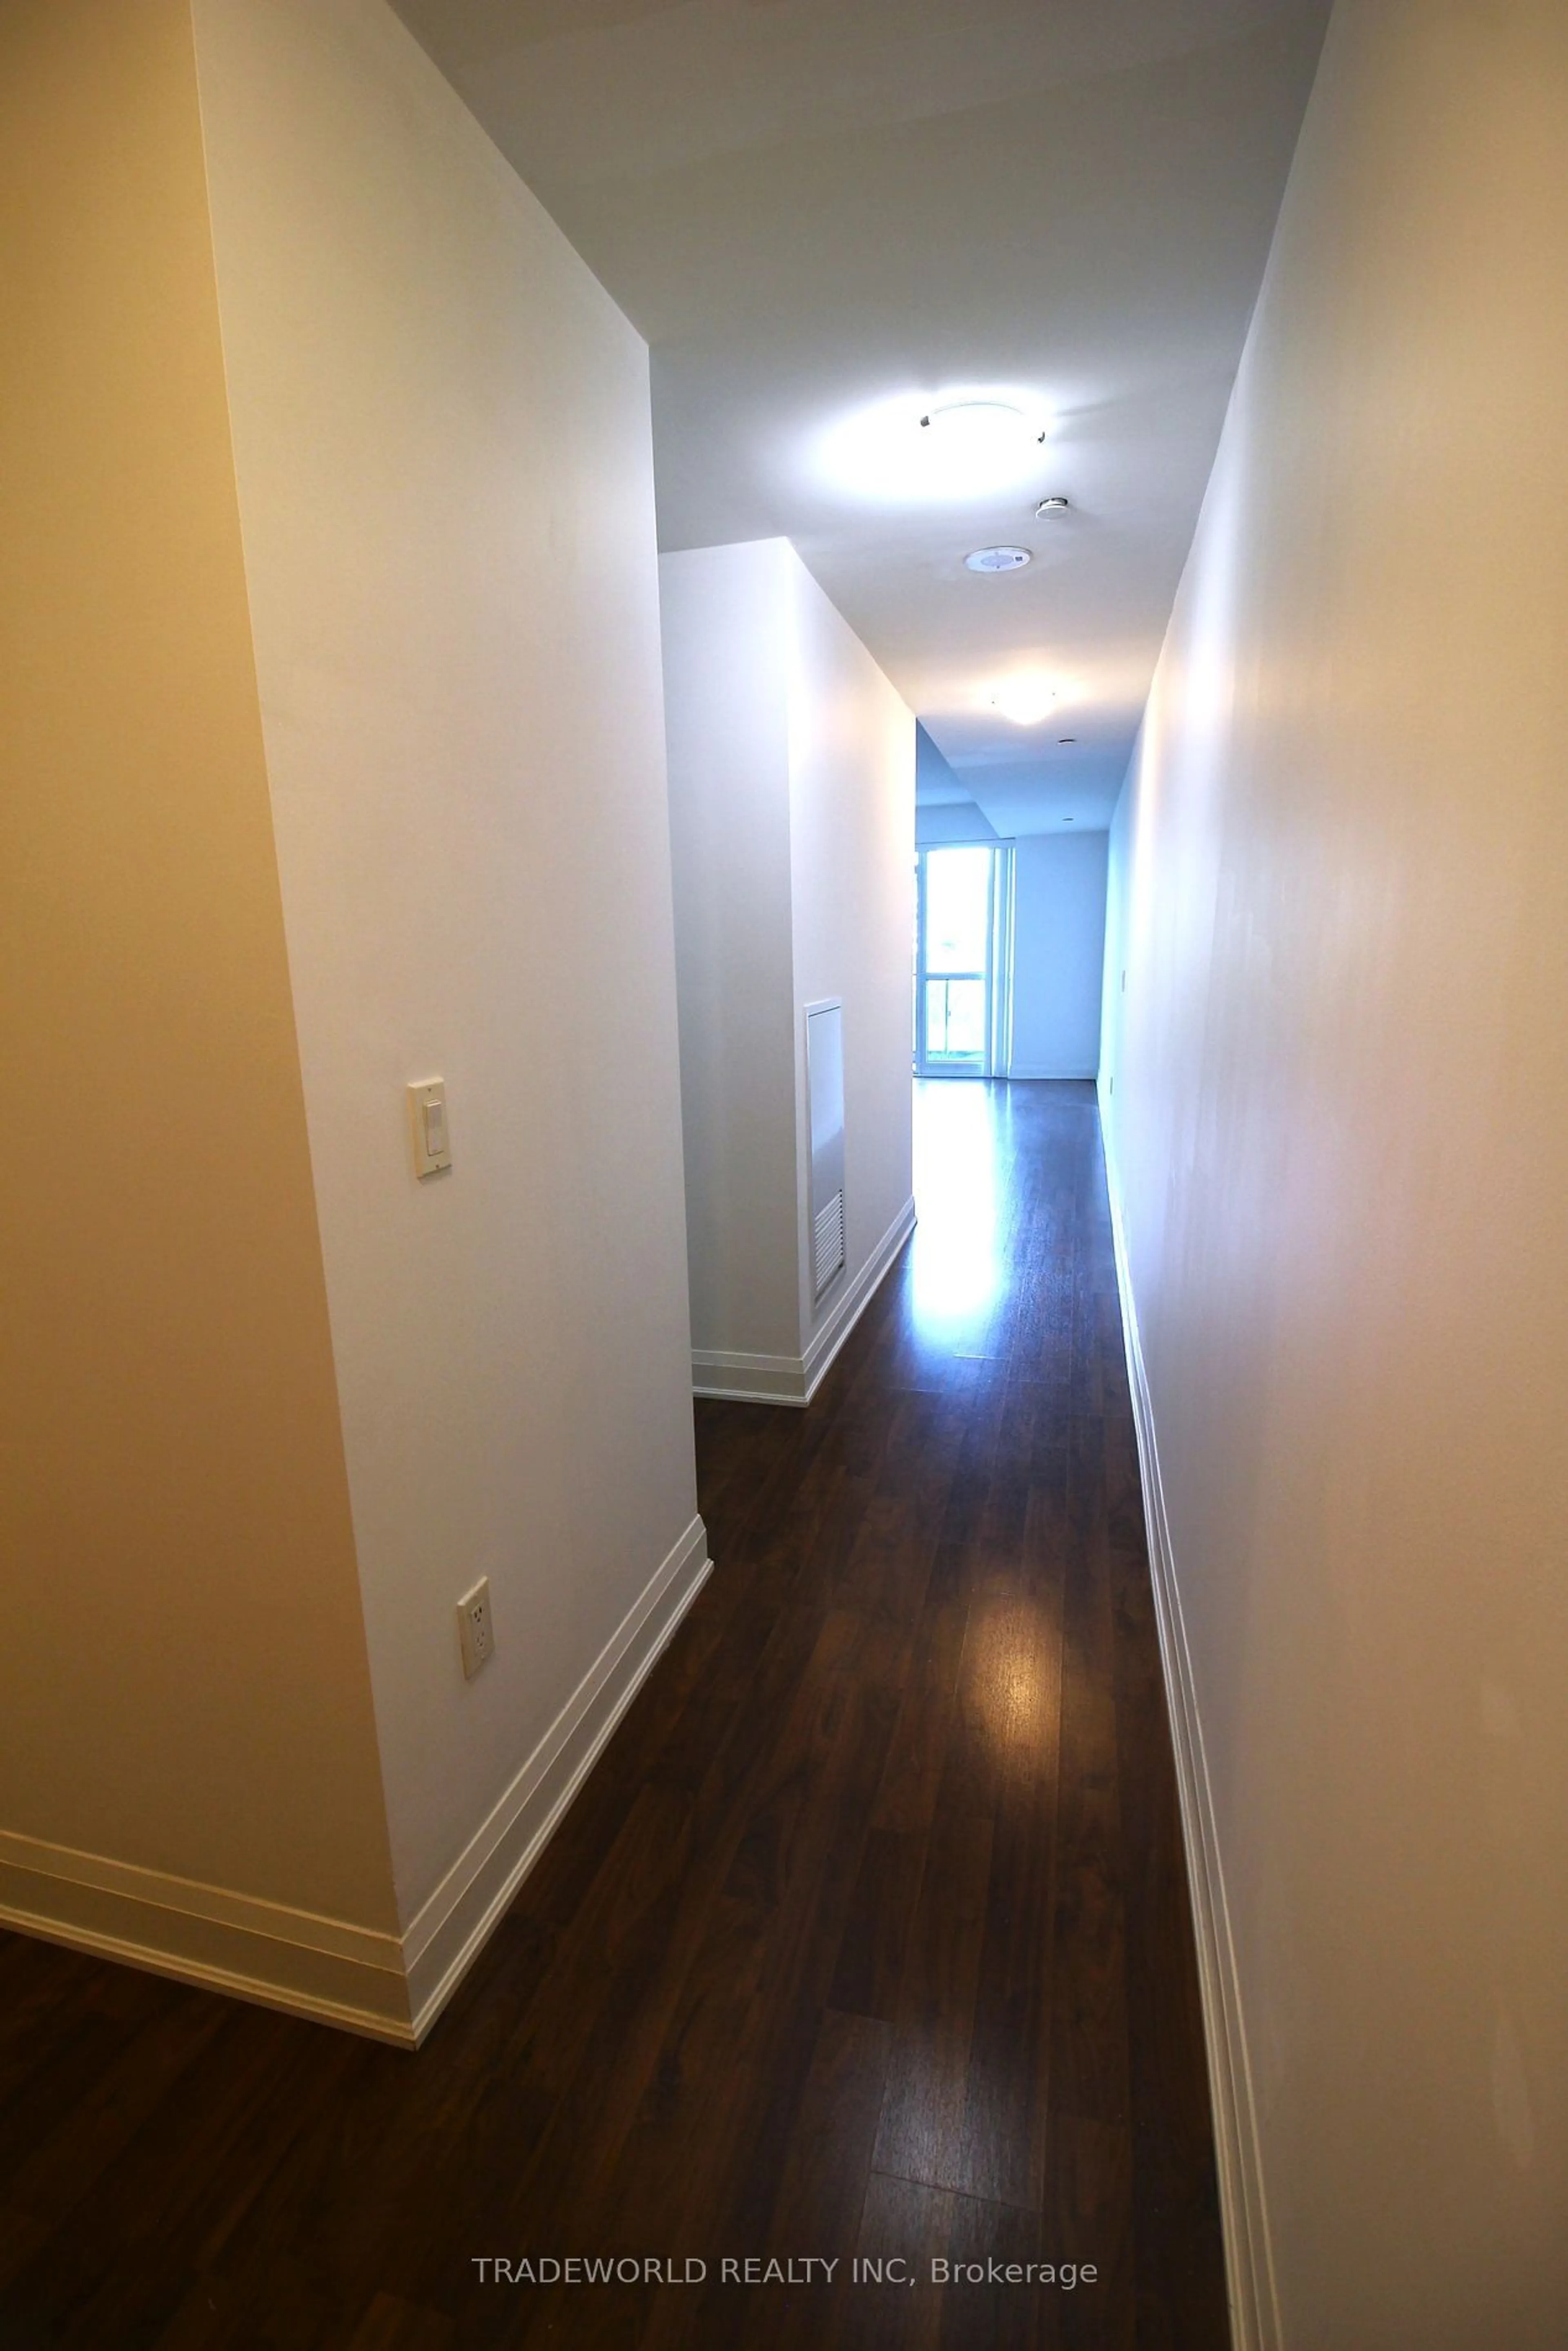 A pic of a room for 160 Vanderhoof Ave #301, Toronto Ontario M4G 0B7